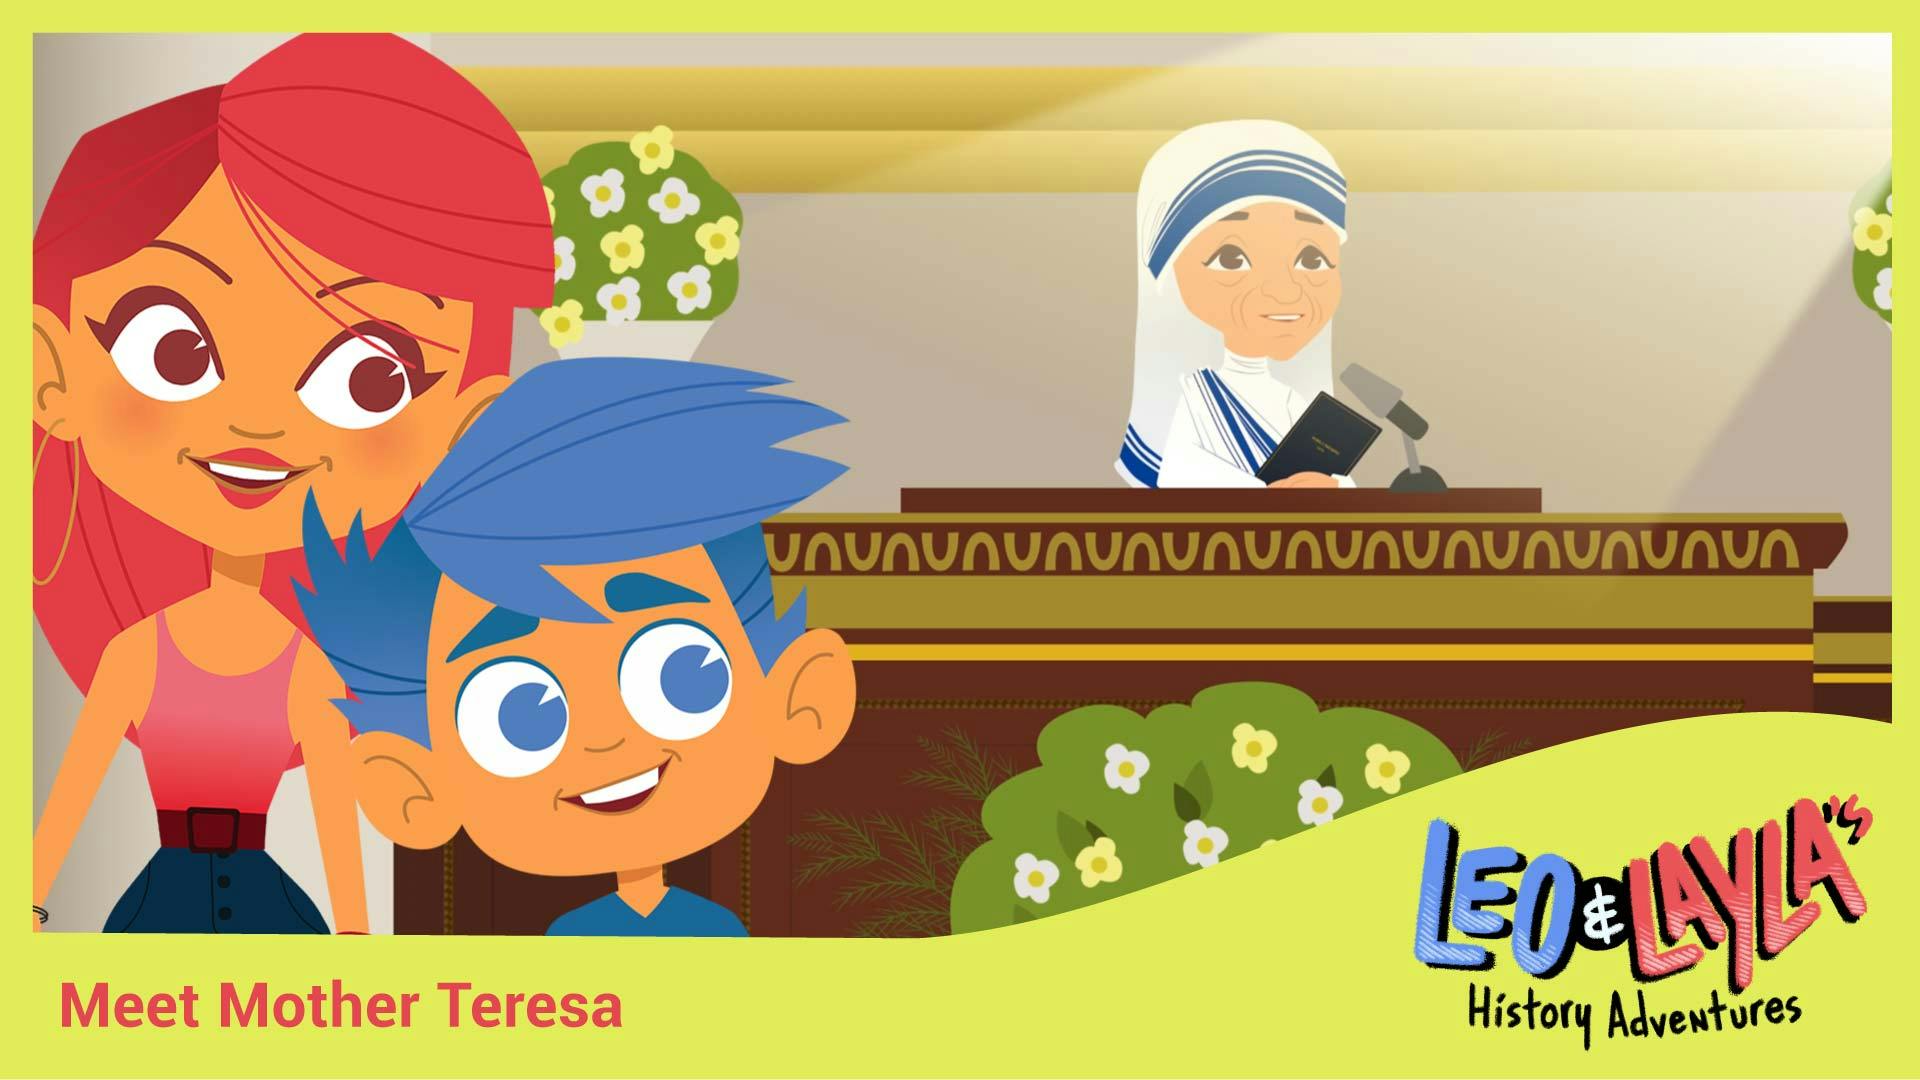 Mother Teresa: The Compassionate Missionary